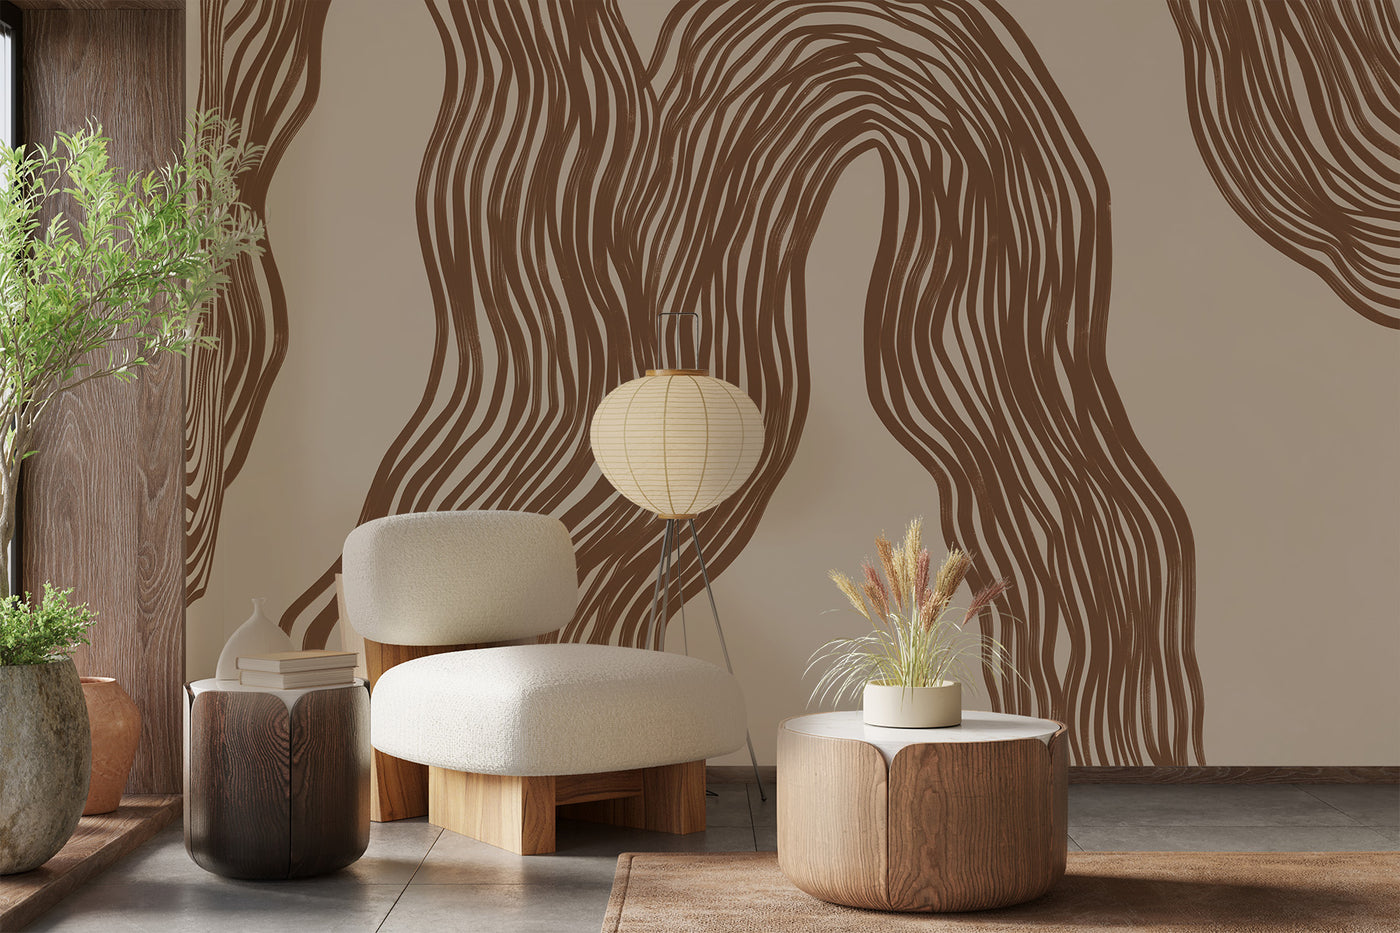 brown artistic wall mural on the wall of this living room. Wooden floor. White stool with wood. White riselamp